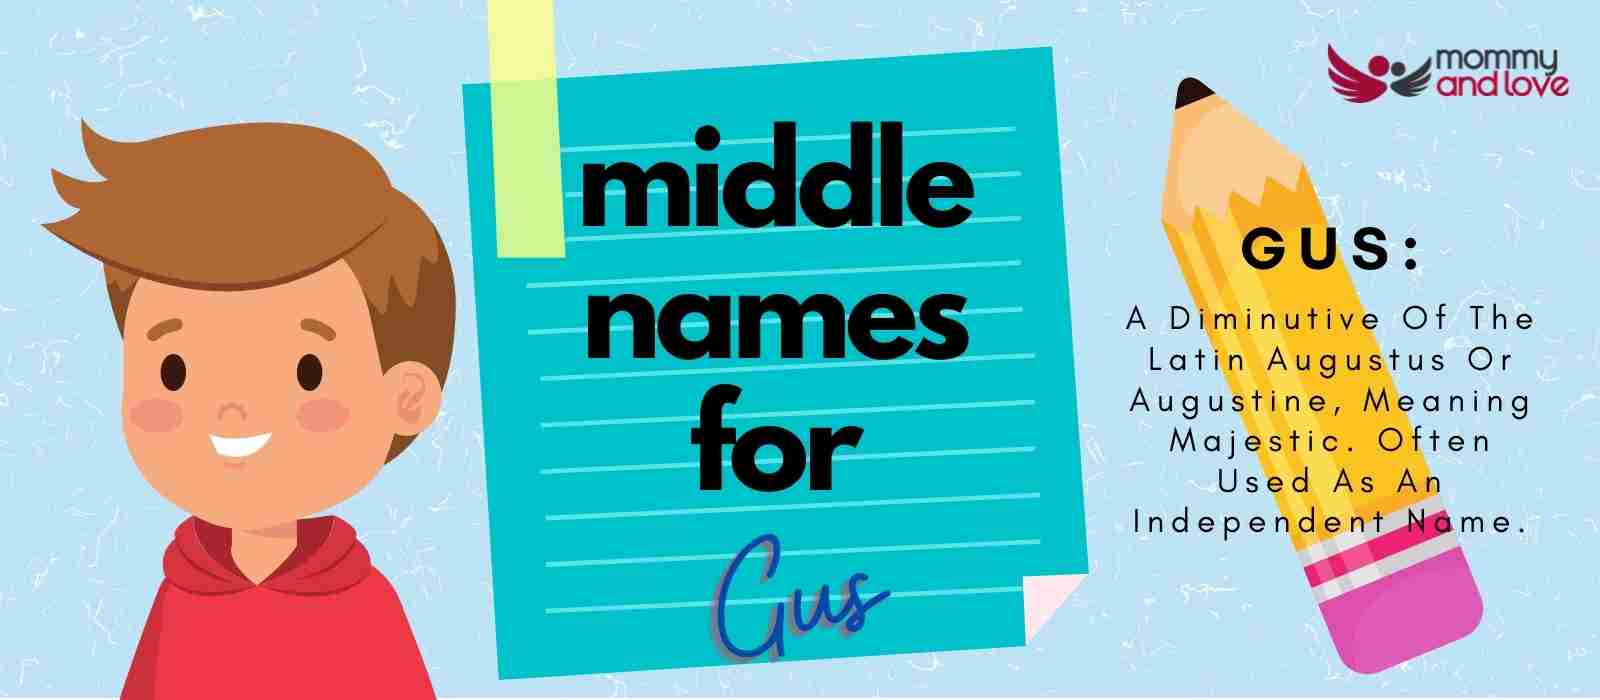 Middle Names for Gus